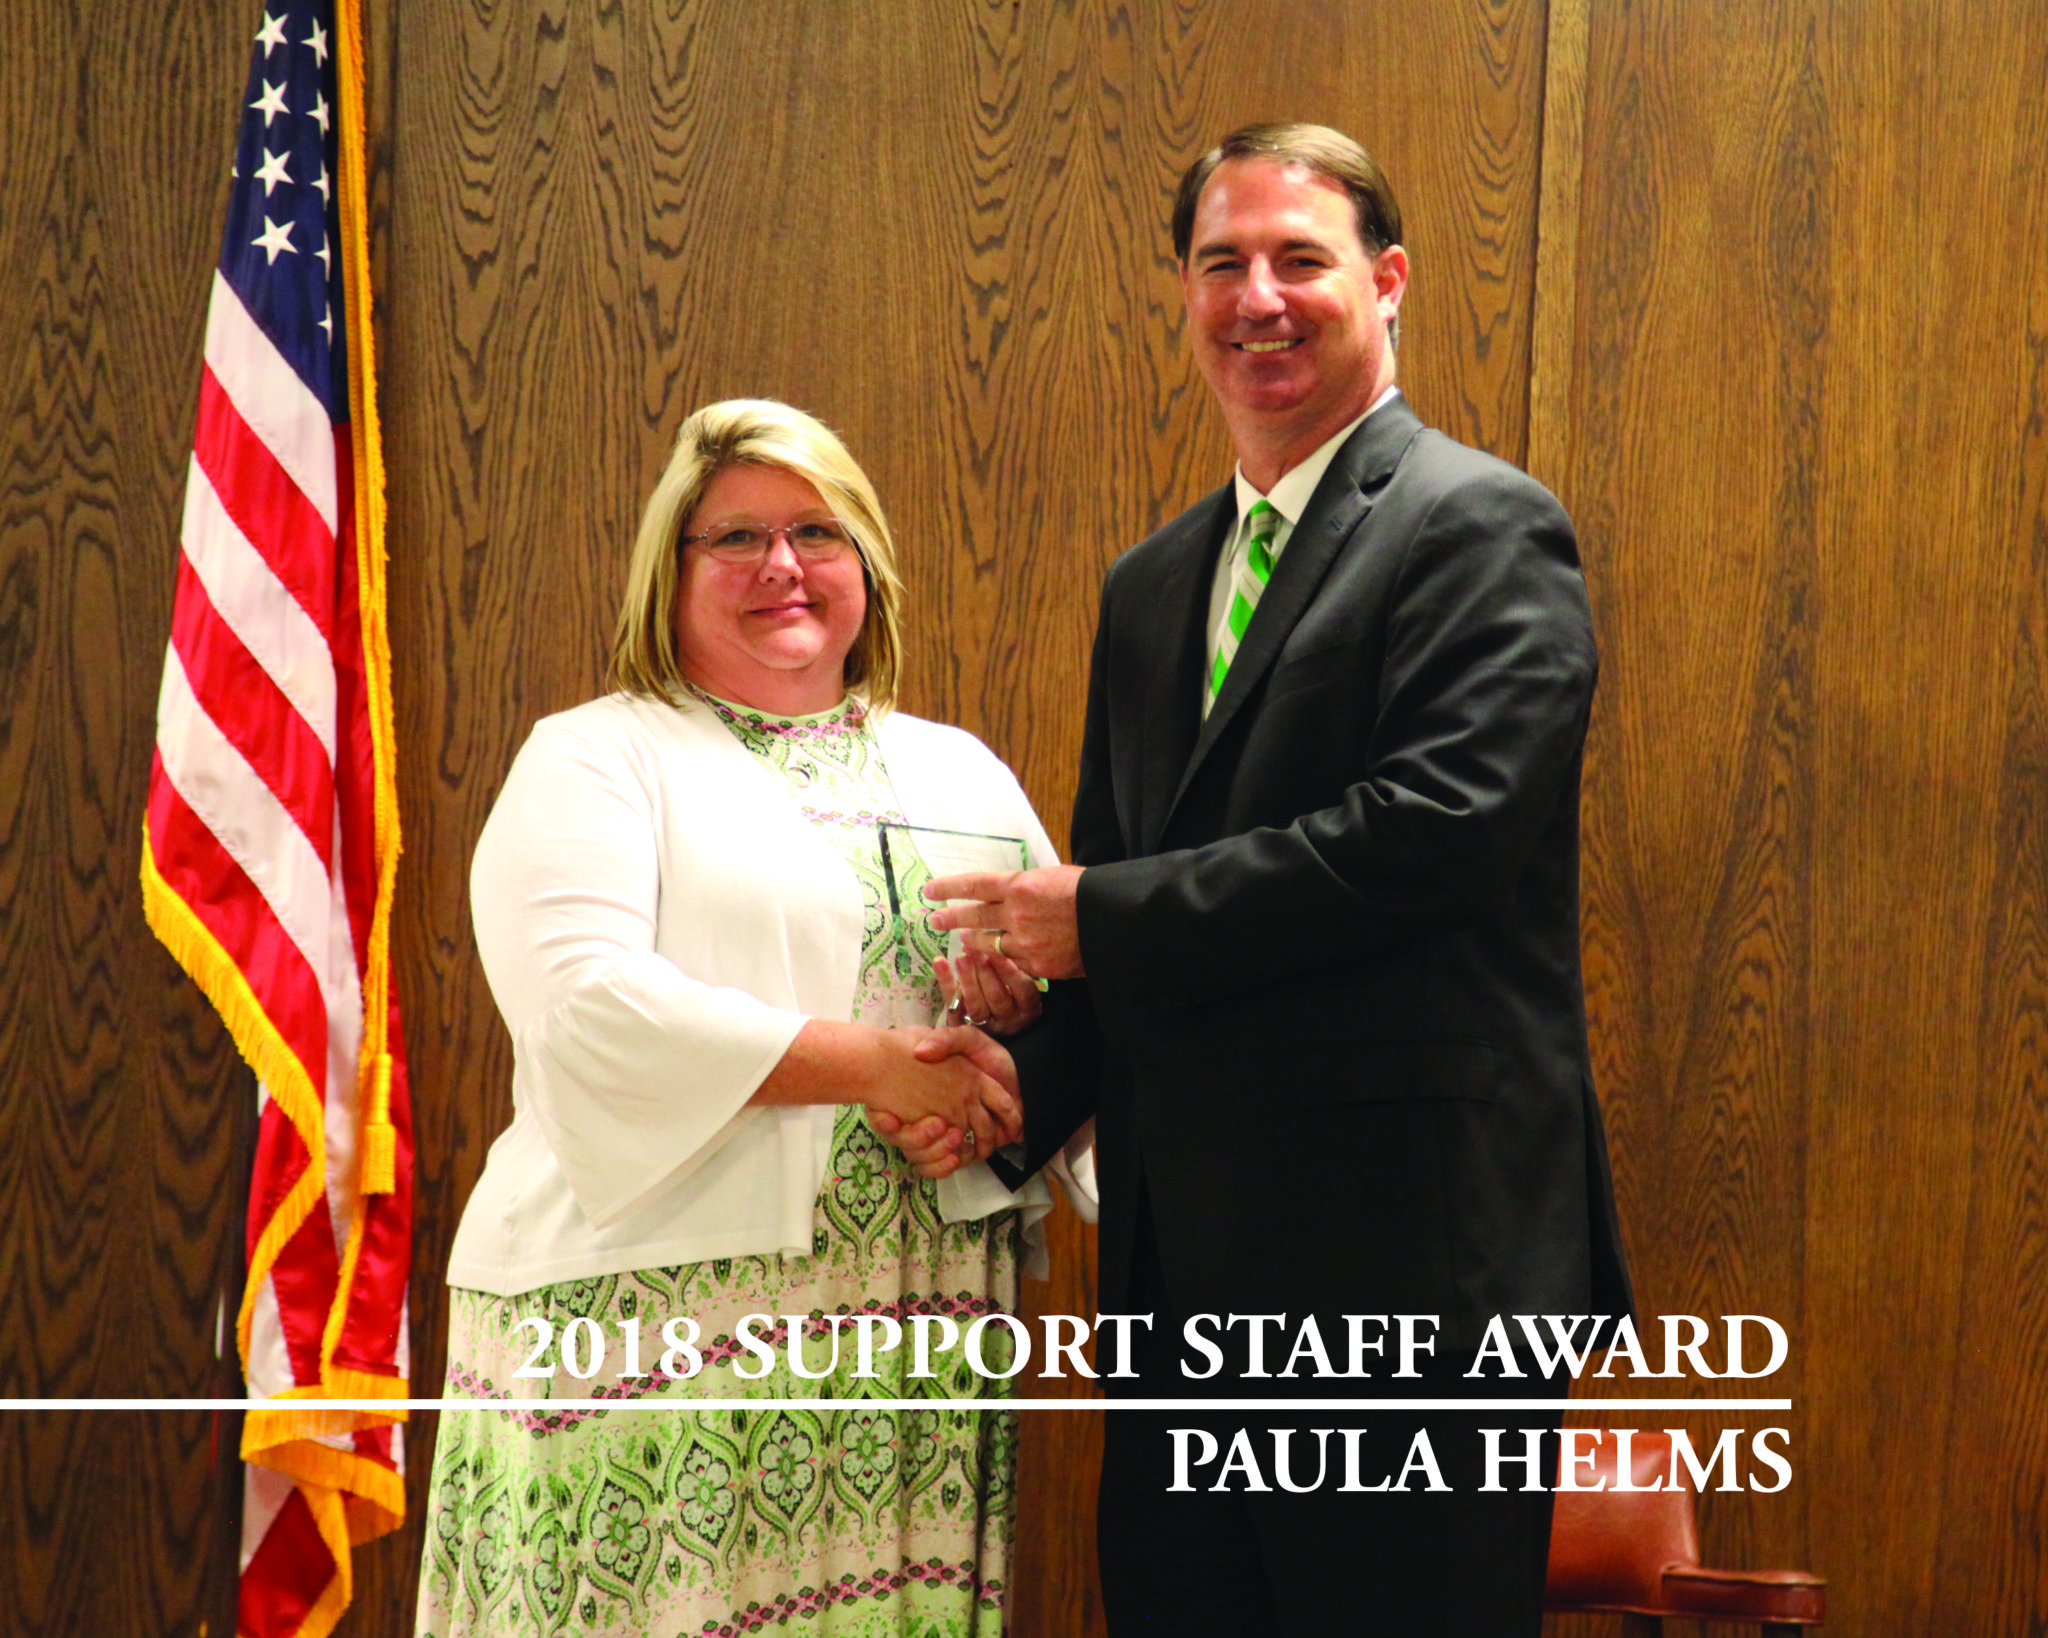 Enterprise State announces this year’s Outstanding Support Staff Member of the Year